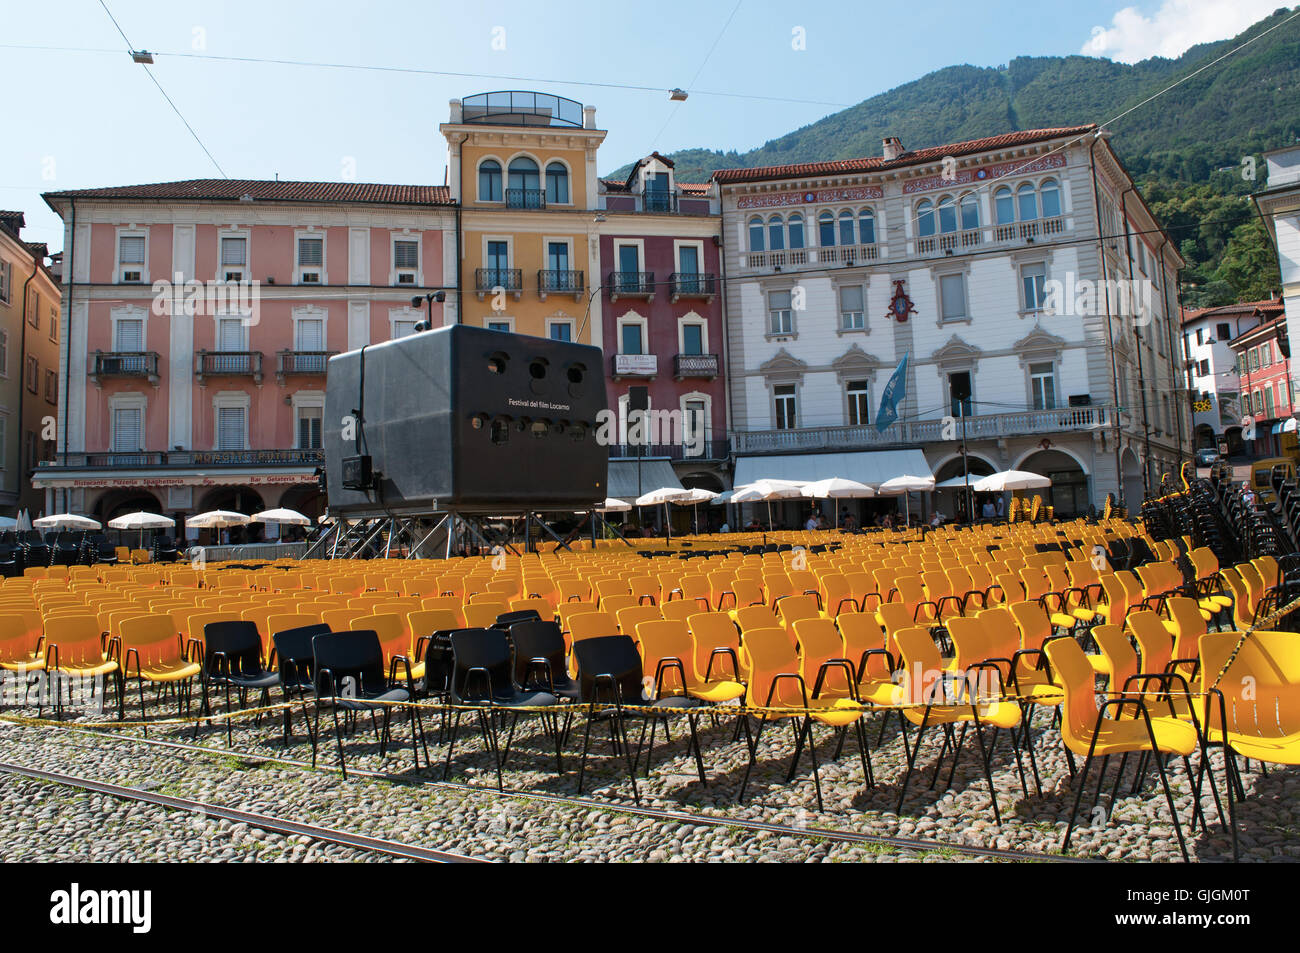 Switzerland: the chairs and movie projector of the Film Festival Locarno, an international film festival held every August Stock Photo